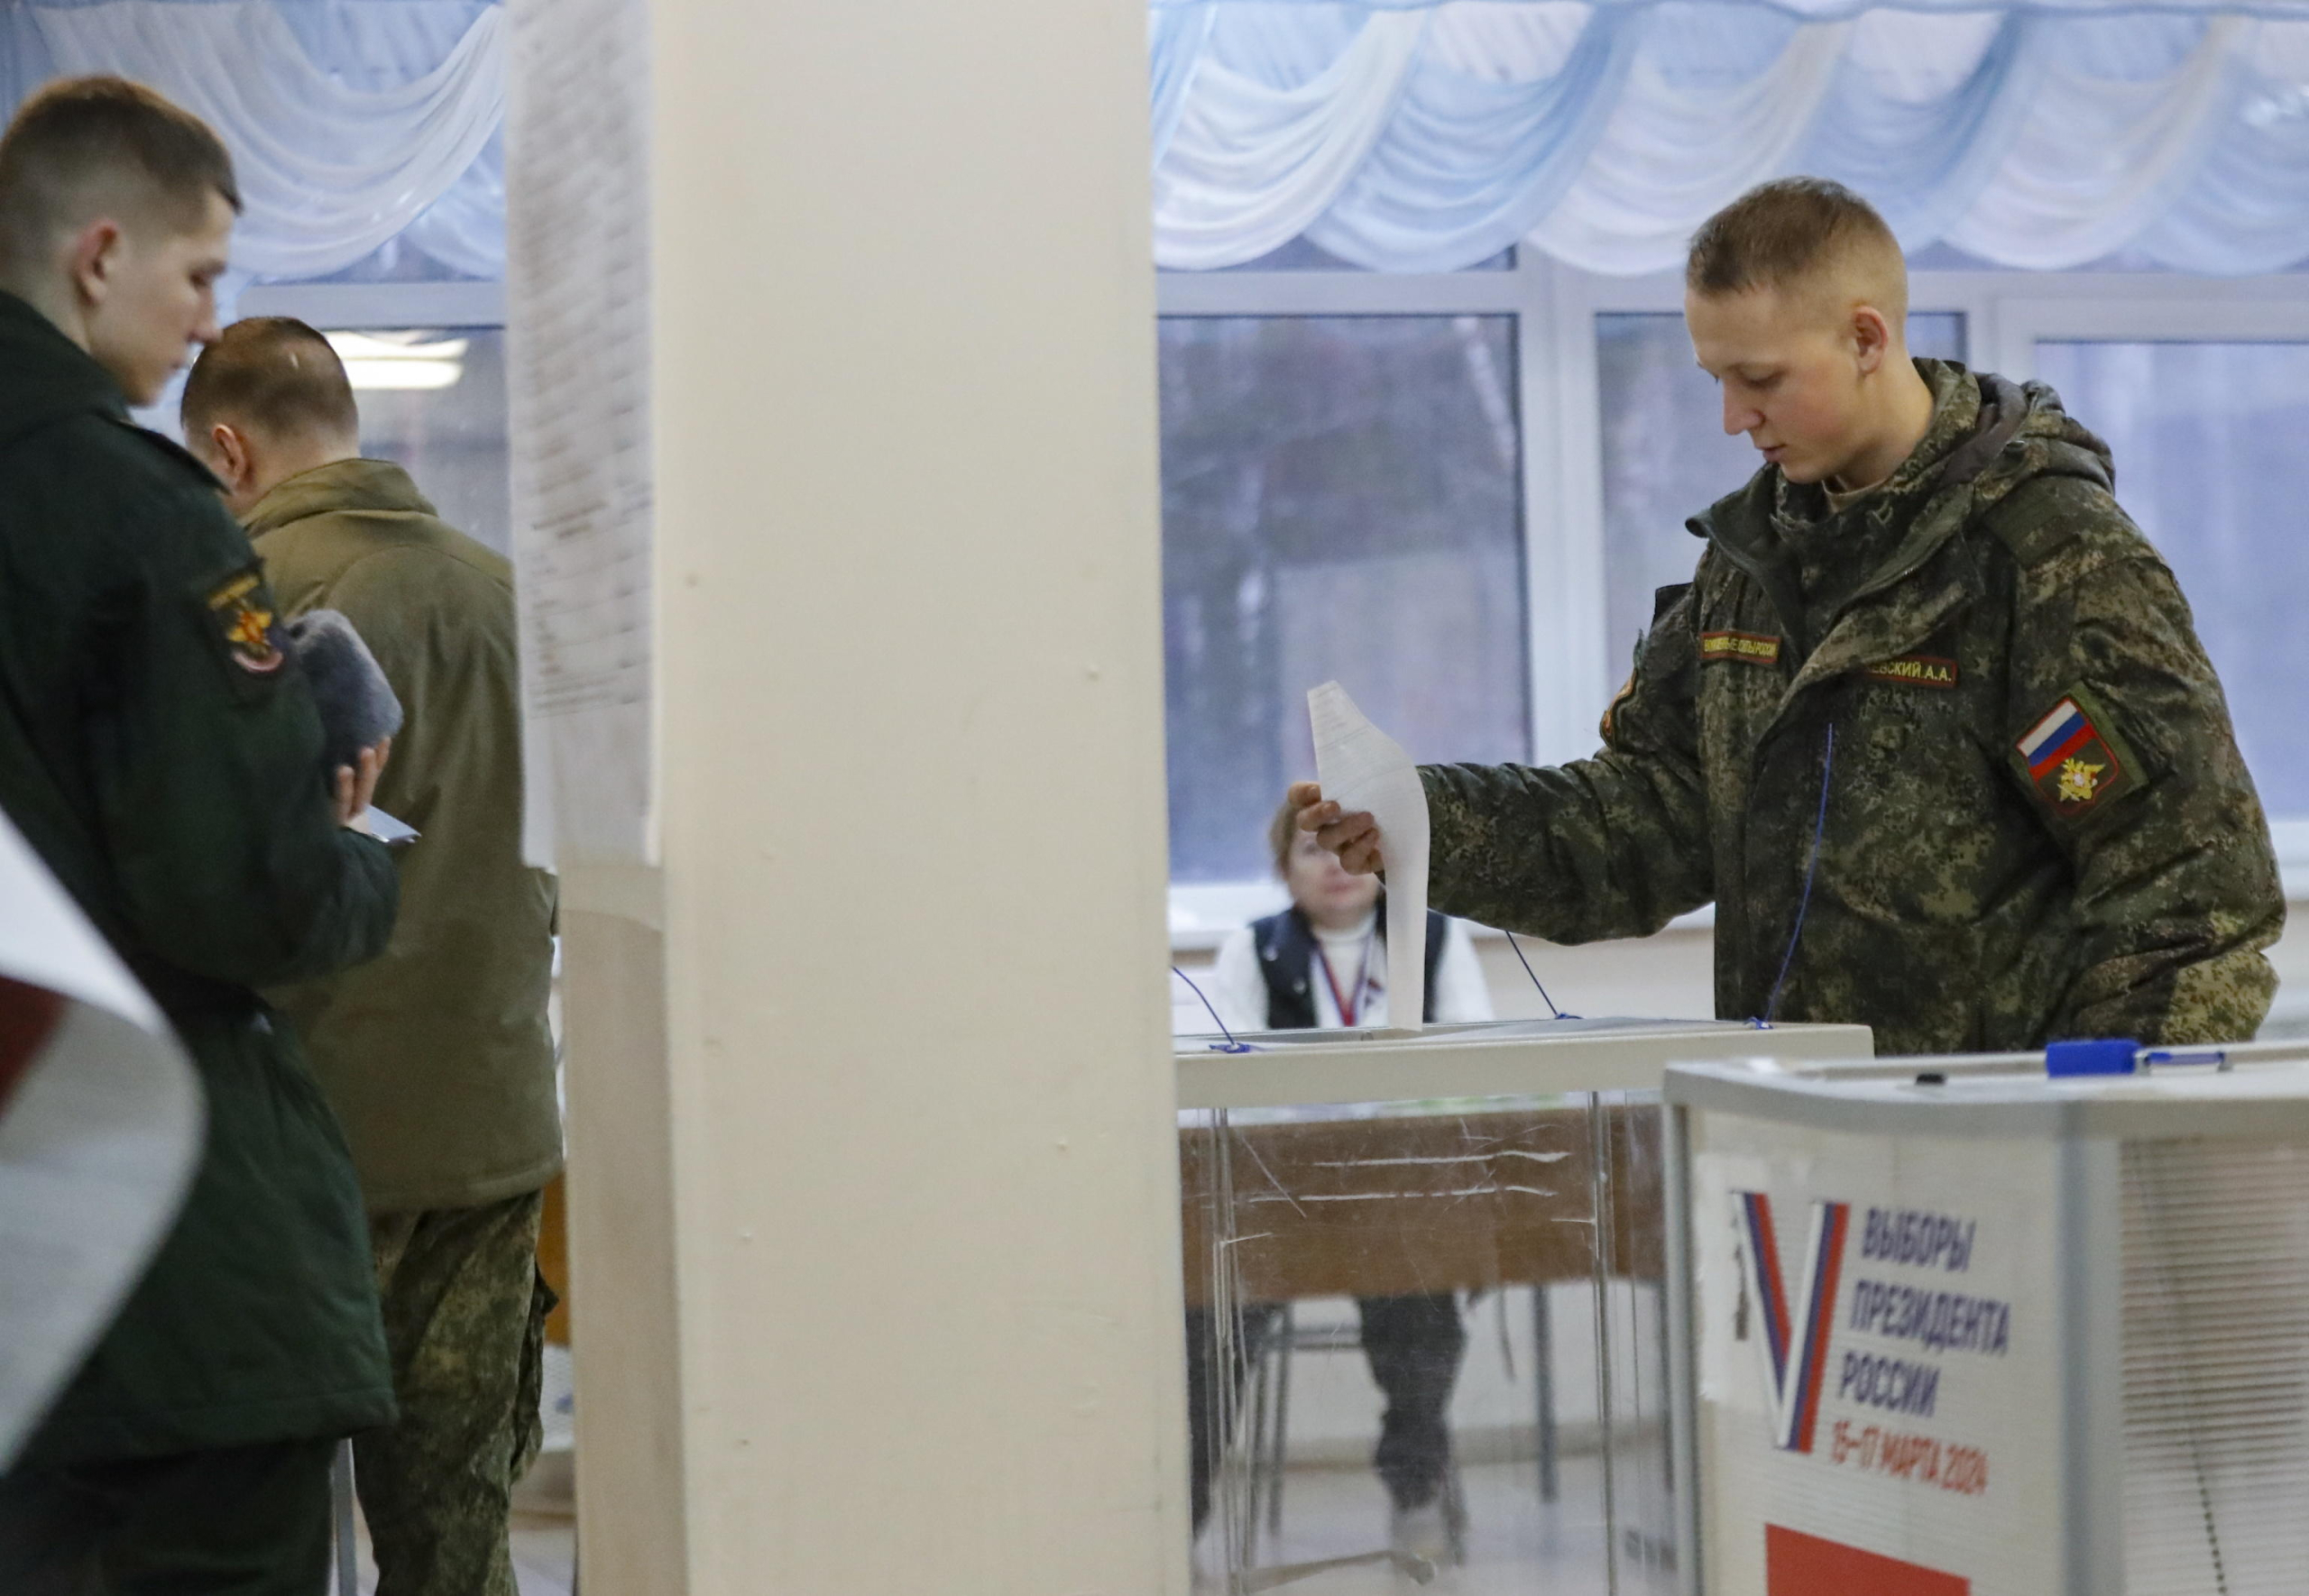 epa11221673 A Russian service member casts his ballot during the Russian presidential elections in Saint Petersburg, Russia, 15 March 2024. The Federation Council has scheduled presidential elections for 17 March 2024. Voting will last three days, from 15 to 17 March. Four candidates registered by the Central Election Commission of the Russian Federation are vying for the post of head of state: Leonid Slutsky, Nikolai Kharitonov, Vladislav Davankov, and Vladimir Putin. Residents of Donbas and Novorossiya are electing the President of Russia for the first time.  EPA/ANATOLY MALTSEV